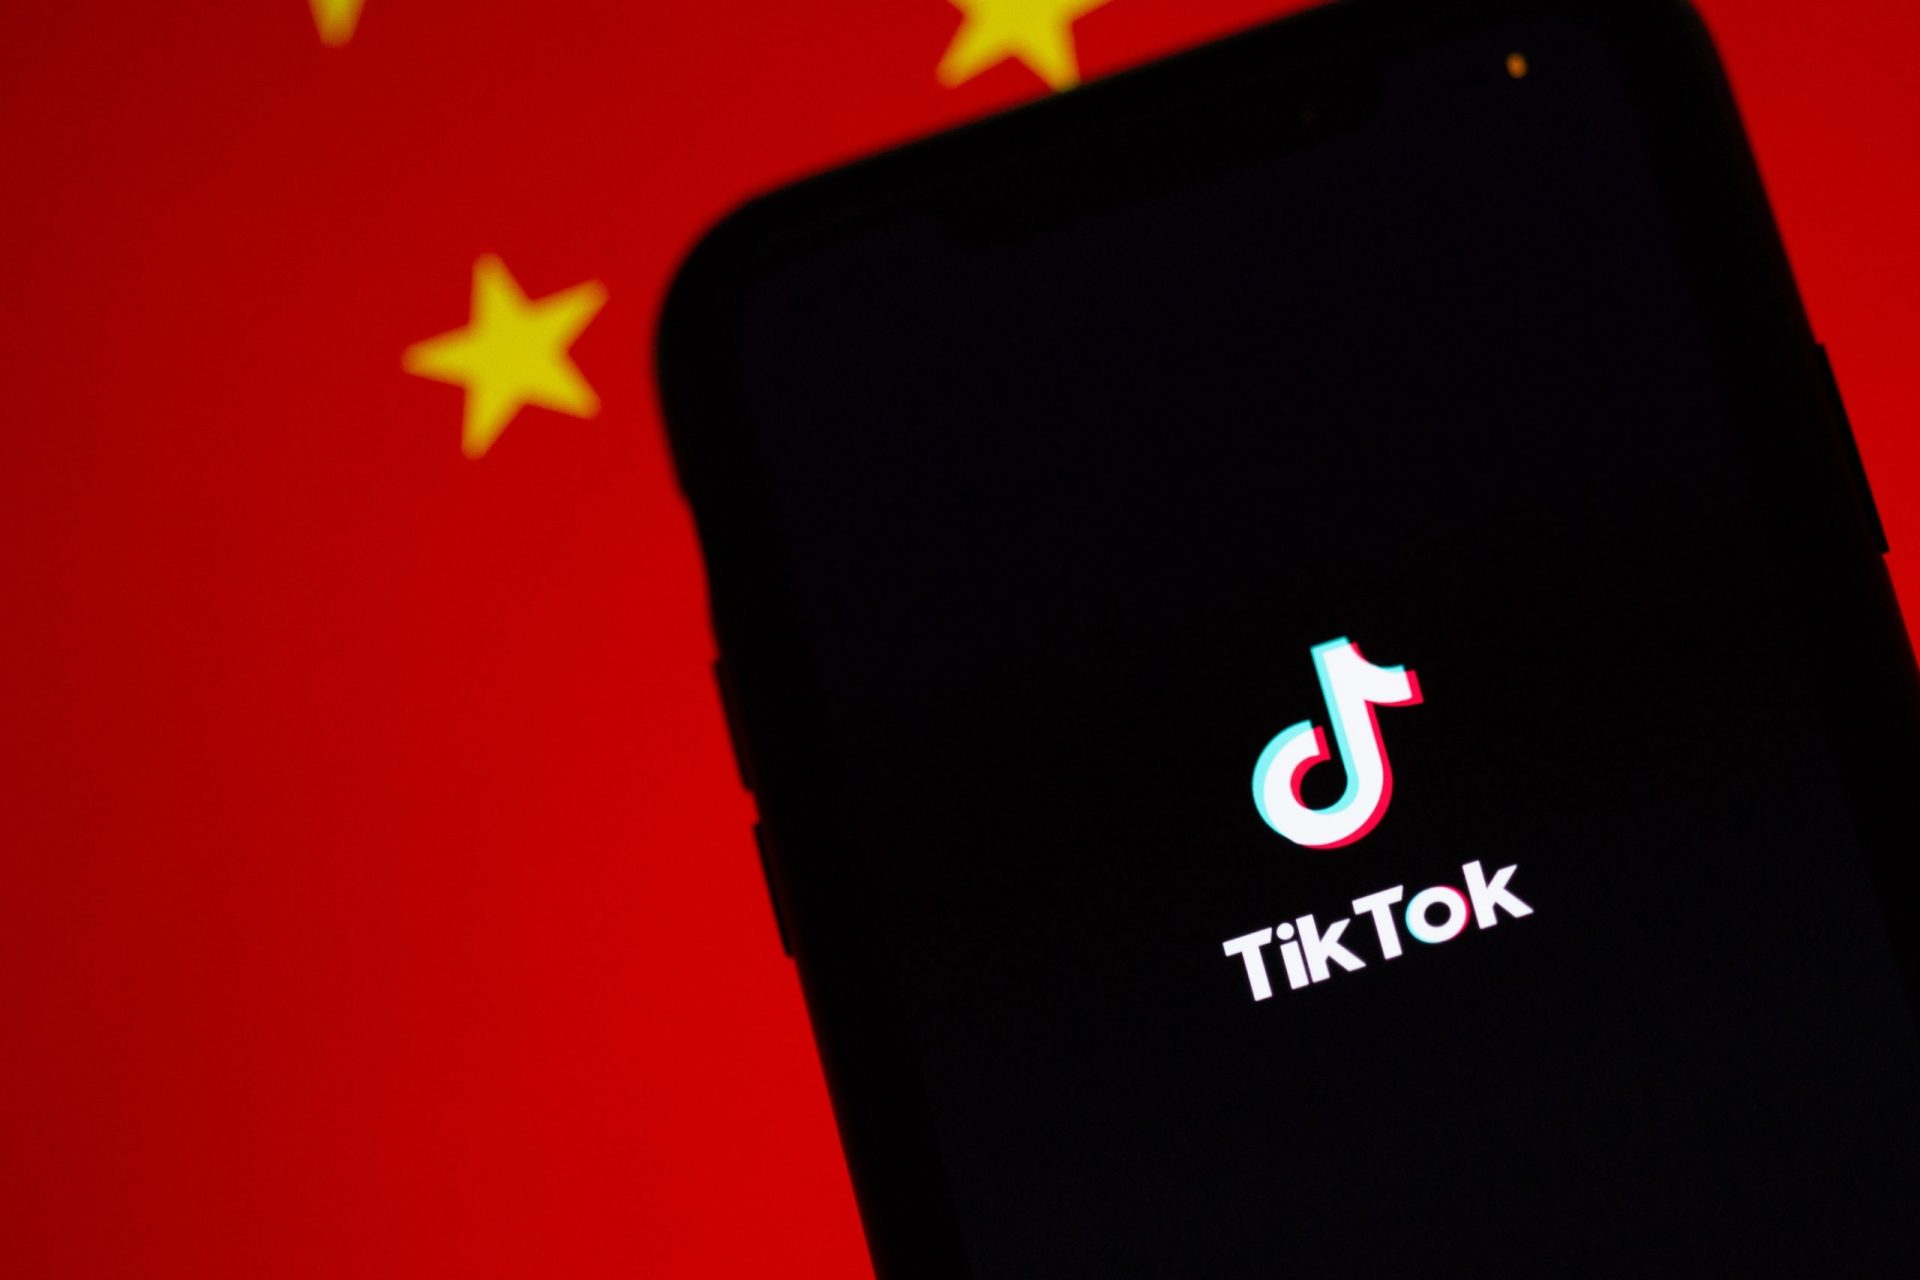 Tiktok now wants to save faces and voiceprints